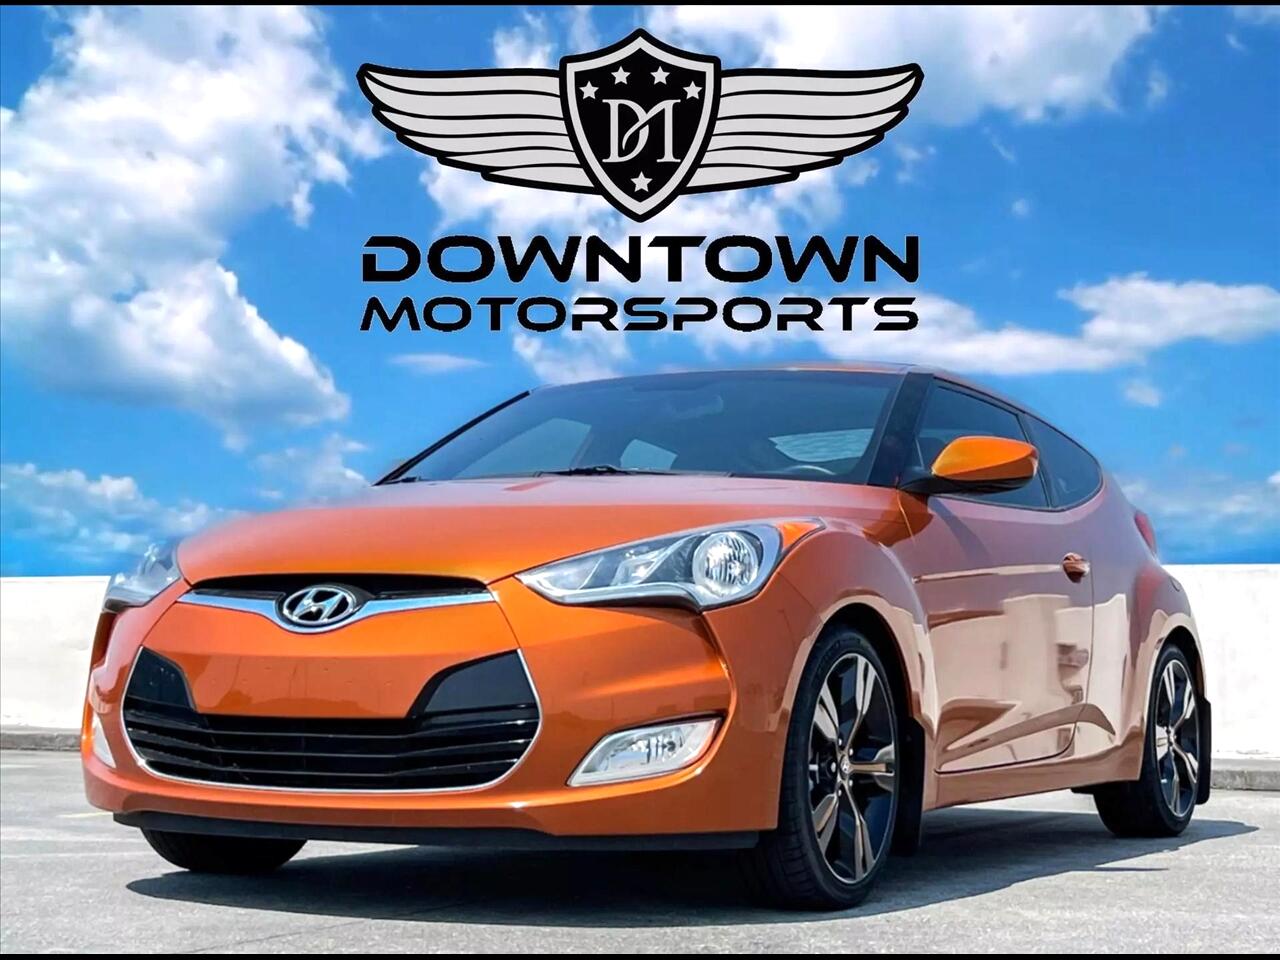 2015 Hyundai Veloster Coupe 3D